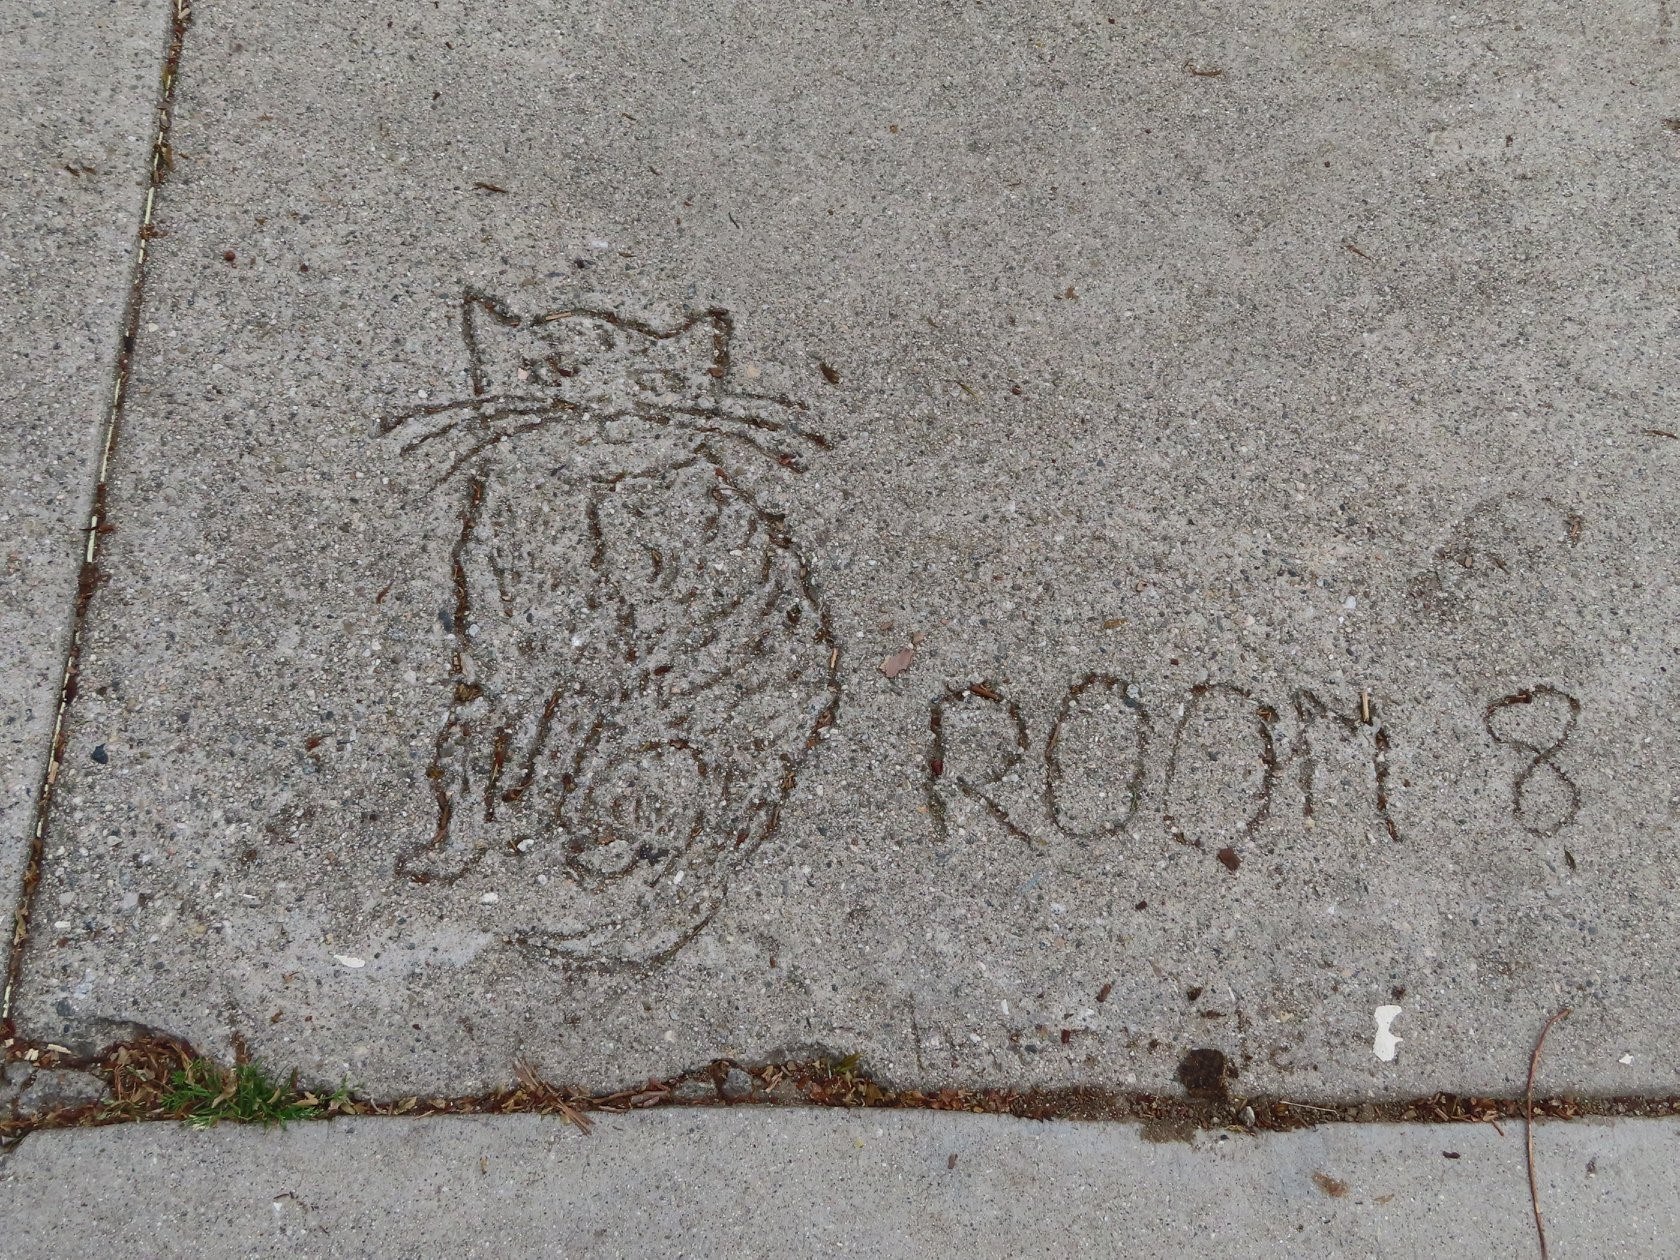 etchings about Room 8 in school's cement walk.